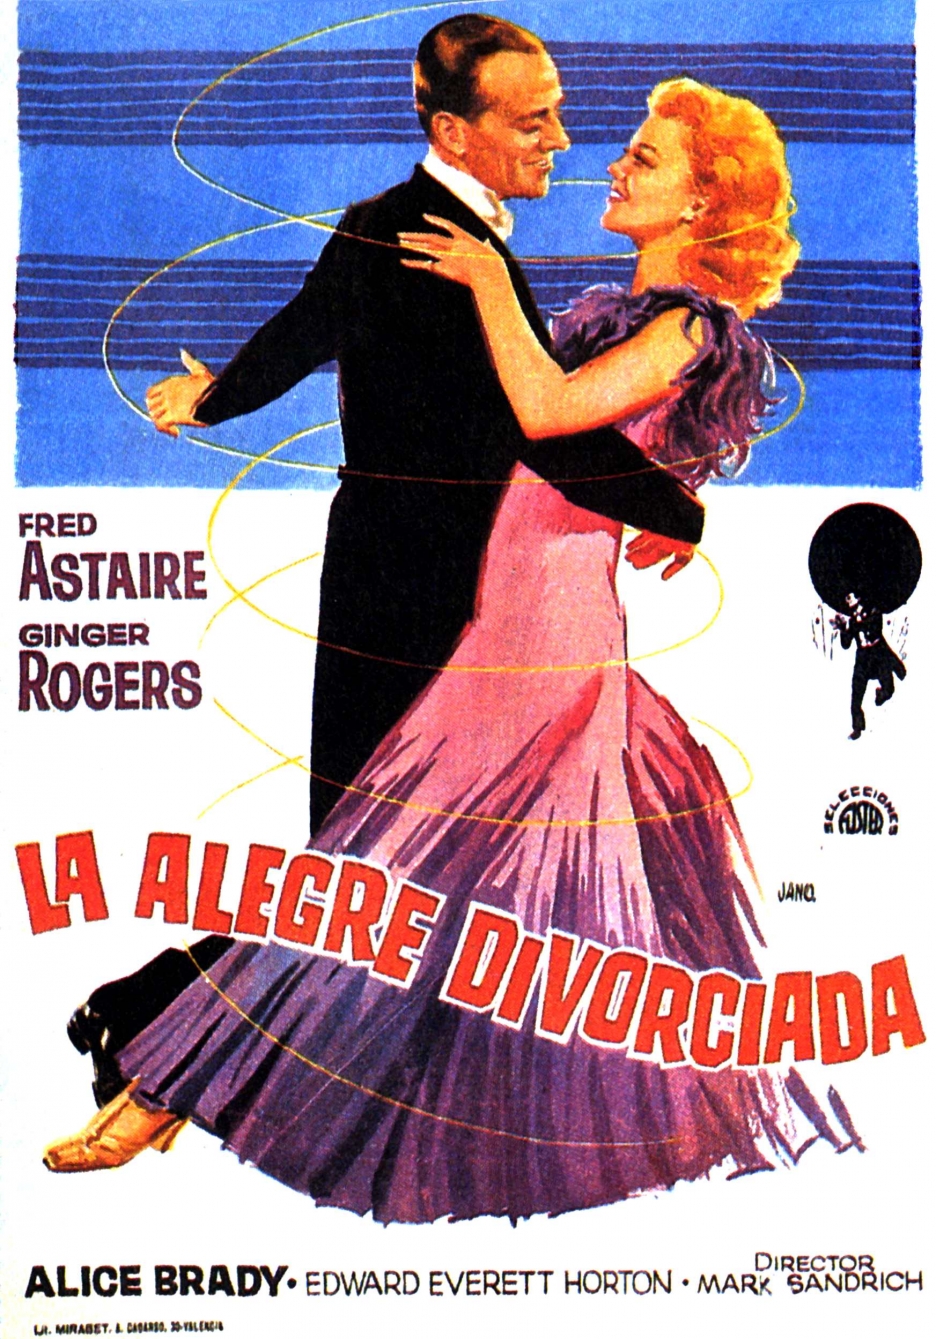 The Silver Screen Affair Foreign Film Poster Friday